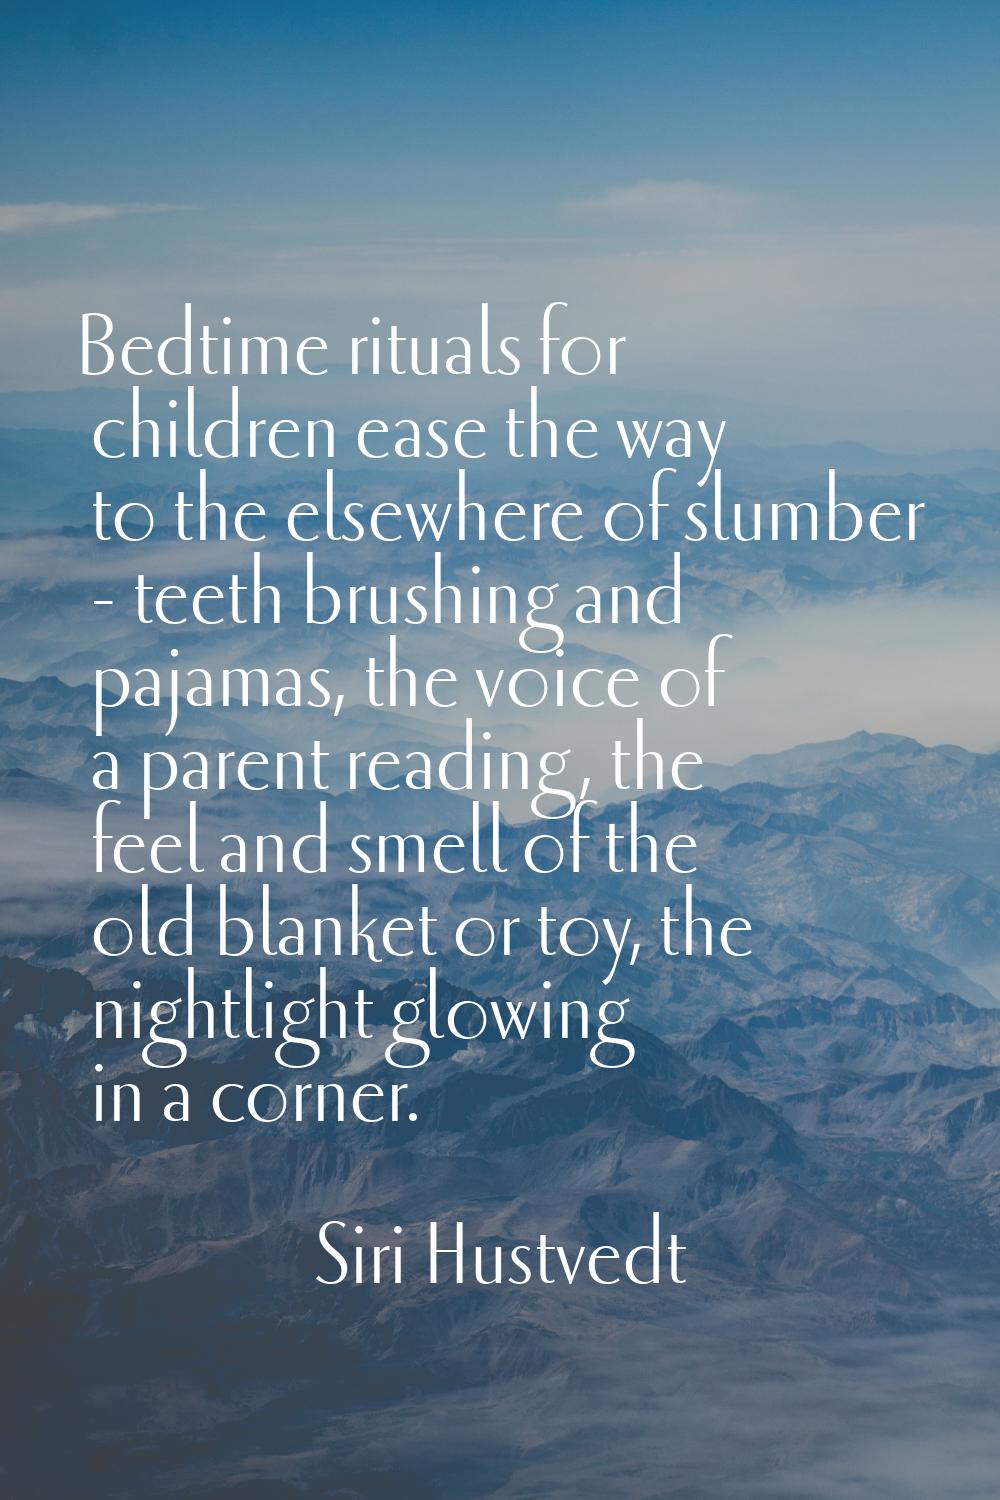 Bedtime rituals for children ease the way to the elsewhere of slumber - teeth brushing and pajamas,